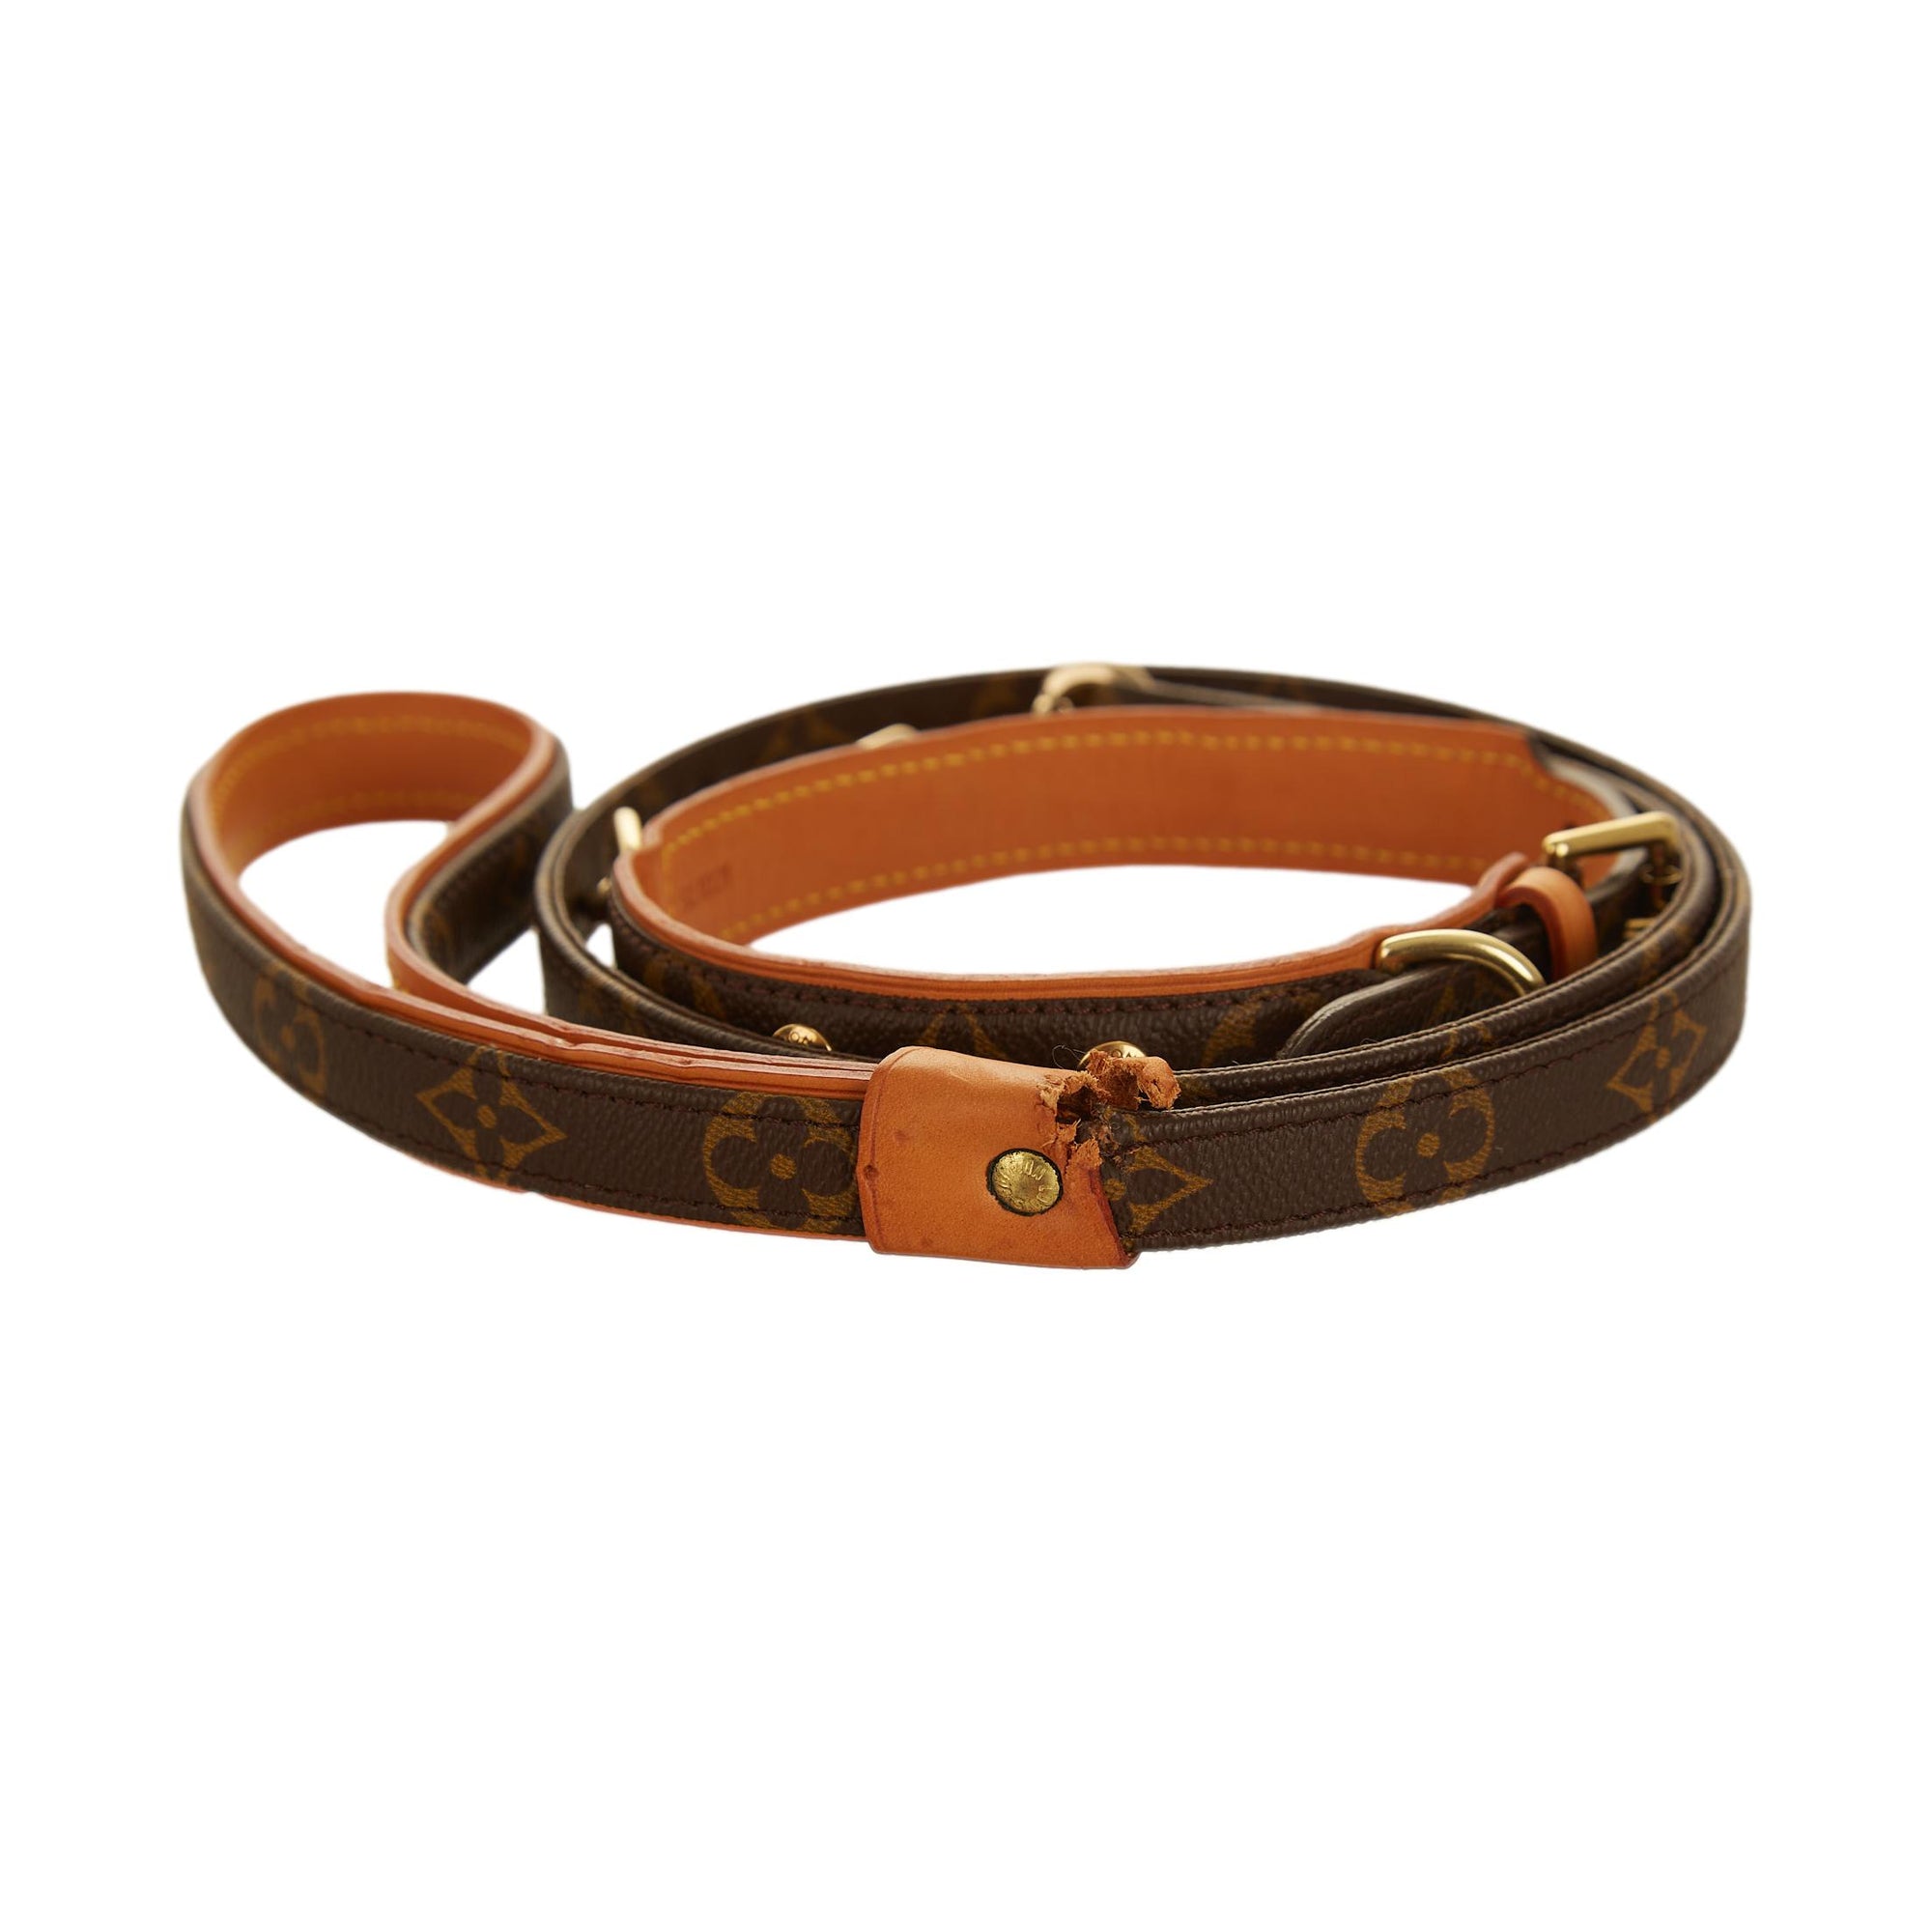 Louis Vuitton Dog Collar and Leash -  Sweden